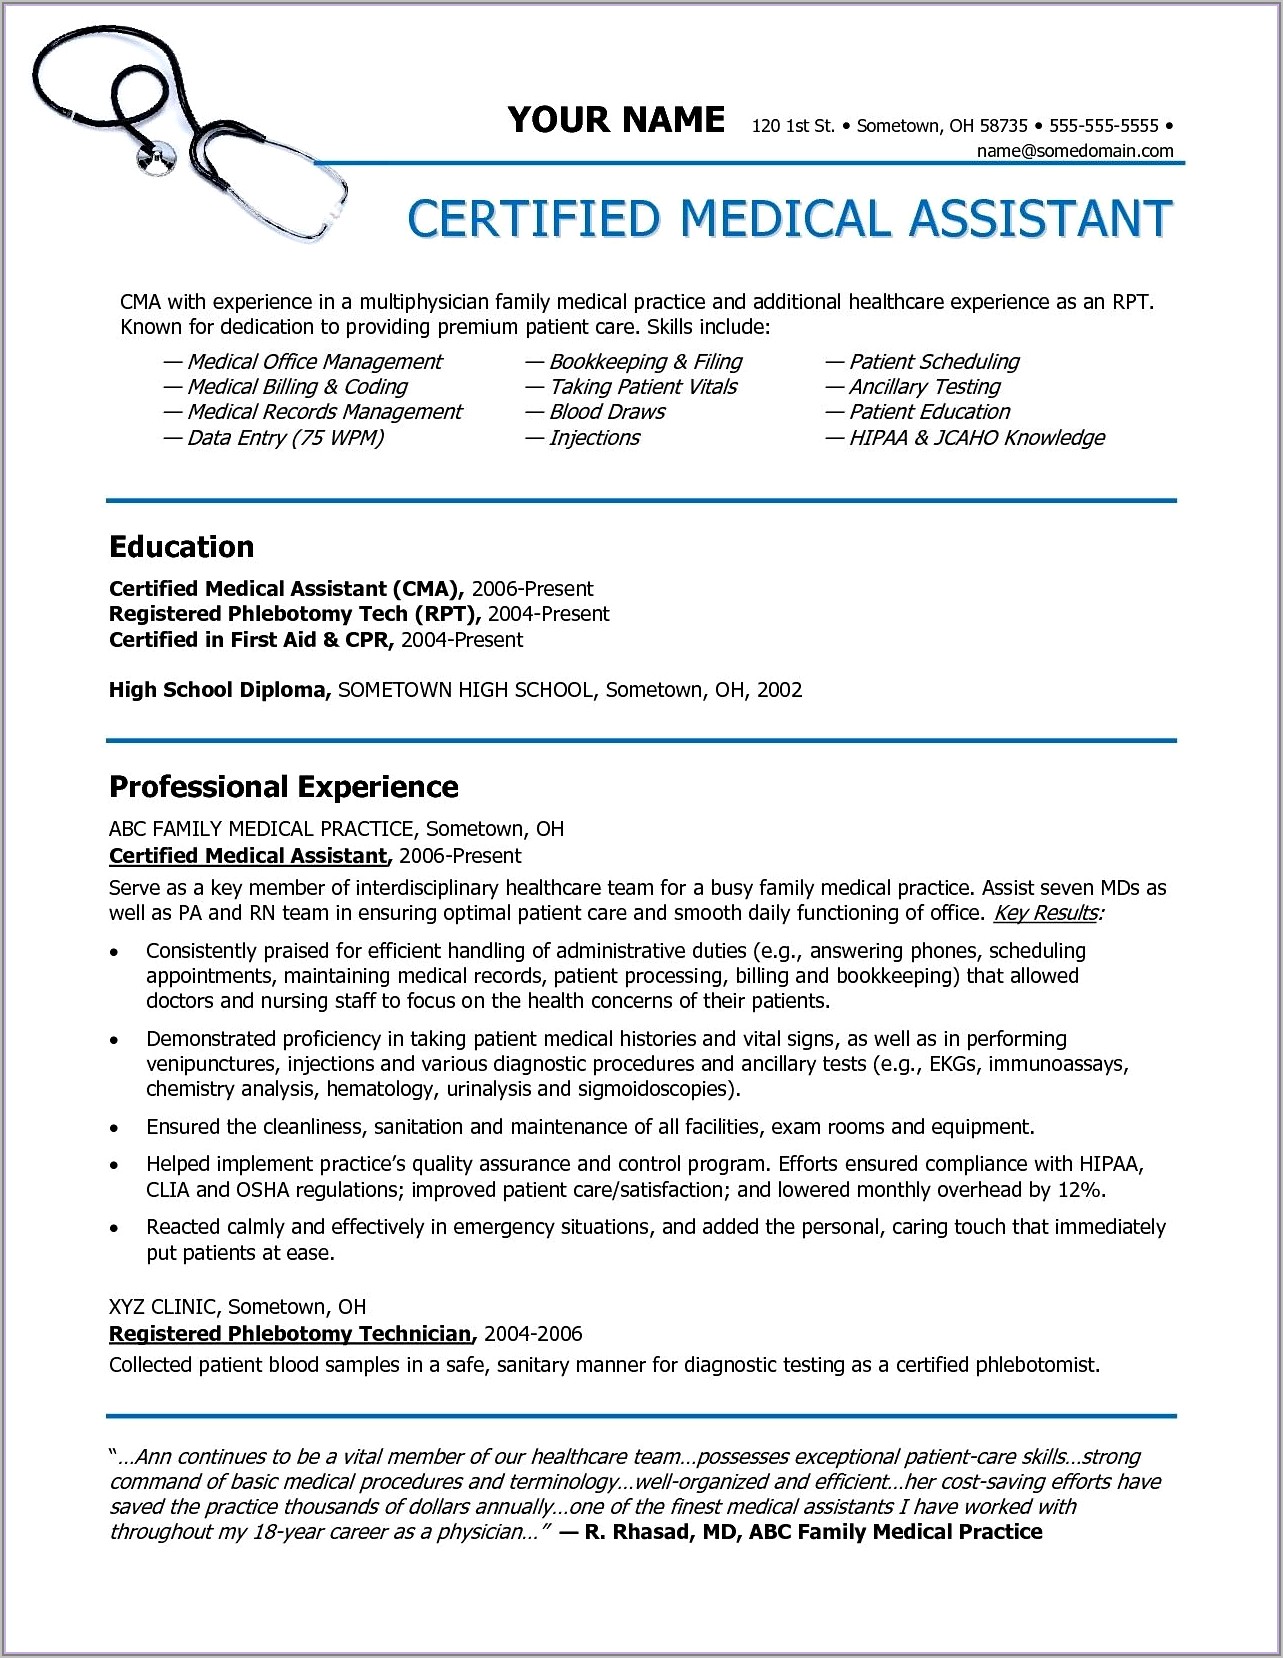 Good Resume Objectives For Medical Assistant